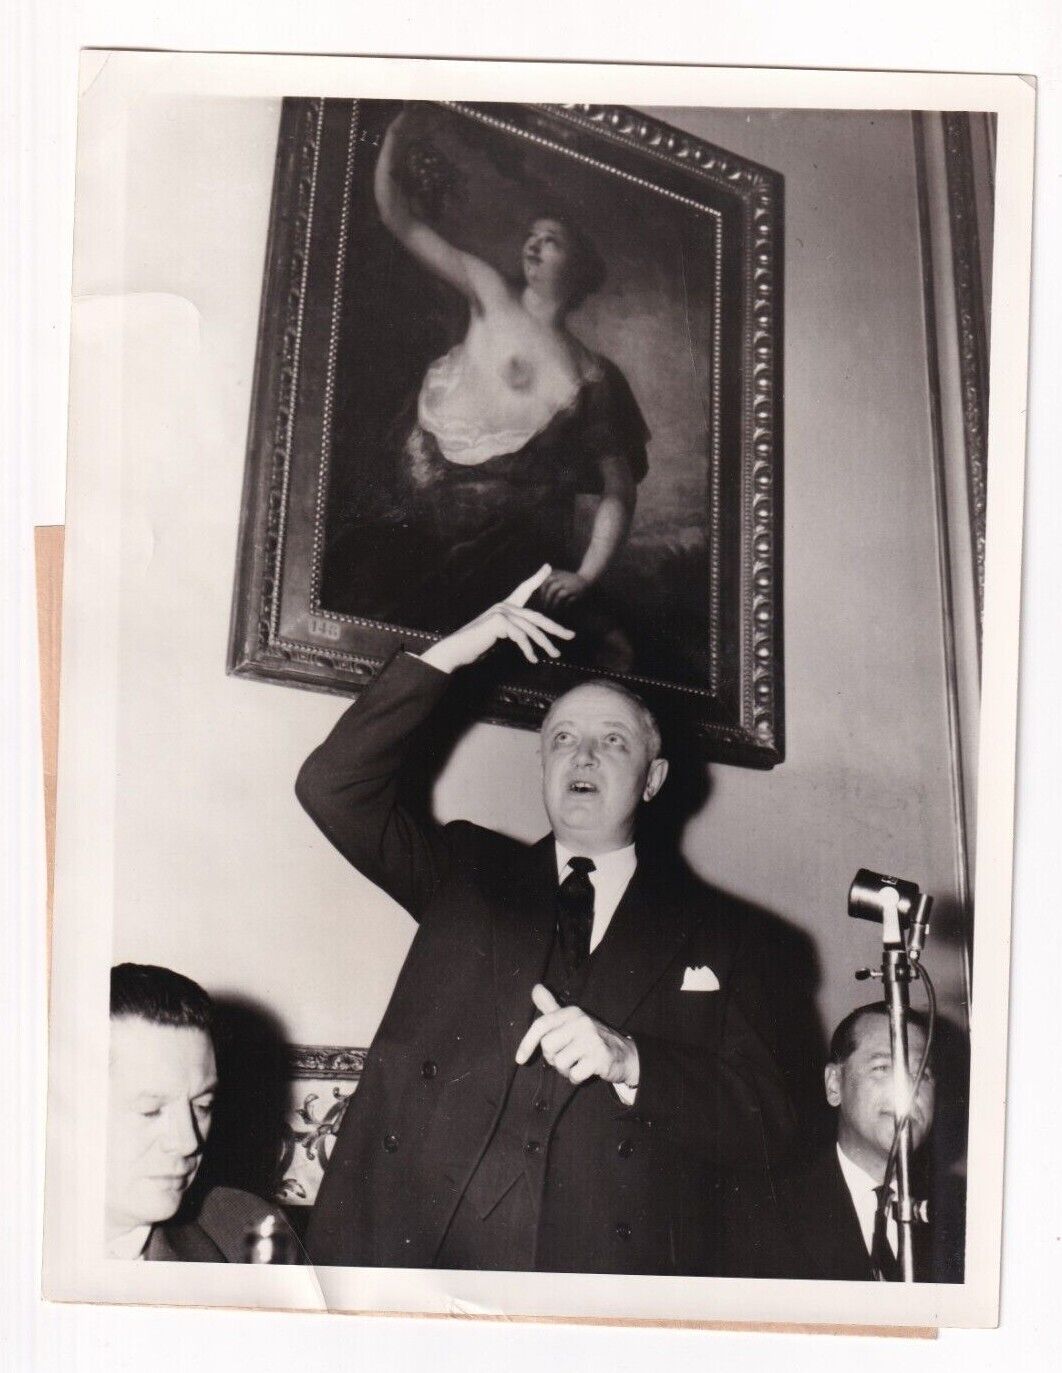 FRENCH FOREIGN MINISTER CHRISTIAN PINEAU FUNNY POSE FRANCE 1956 Photo Y 332